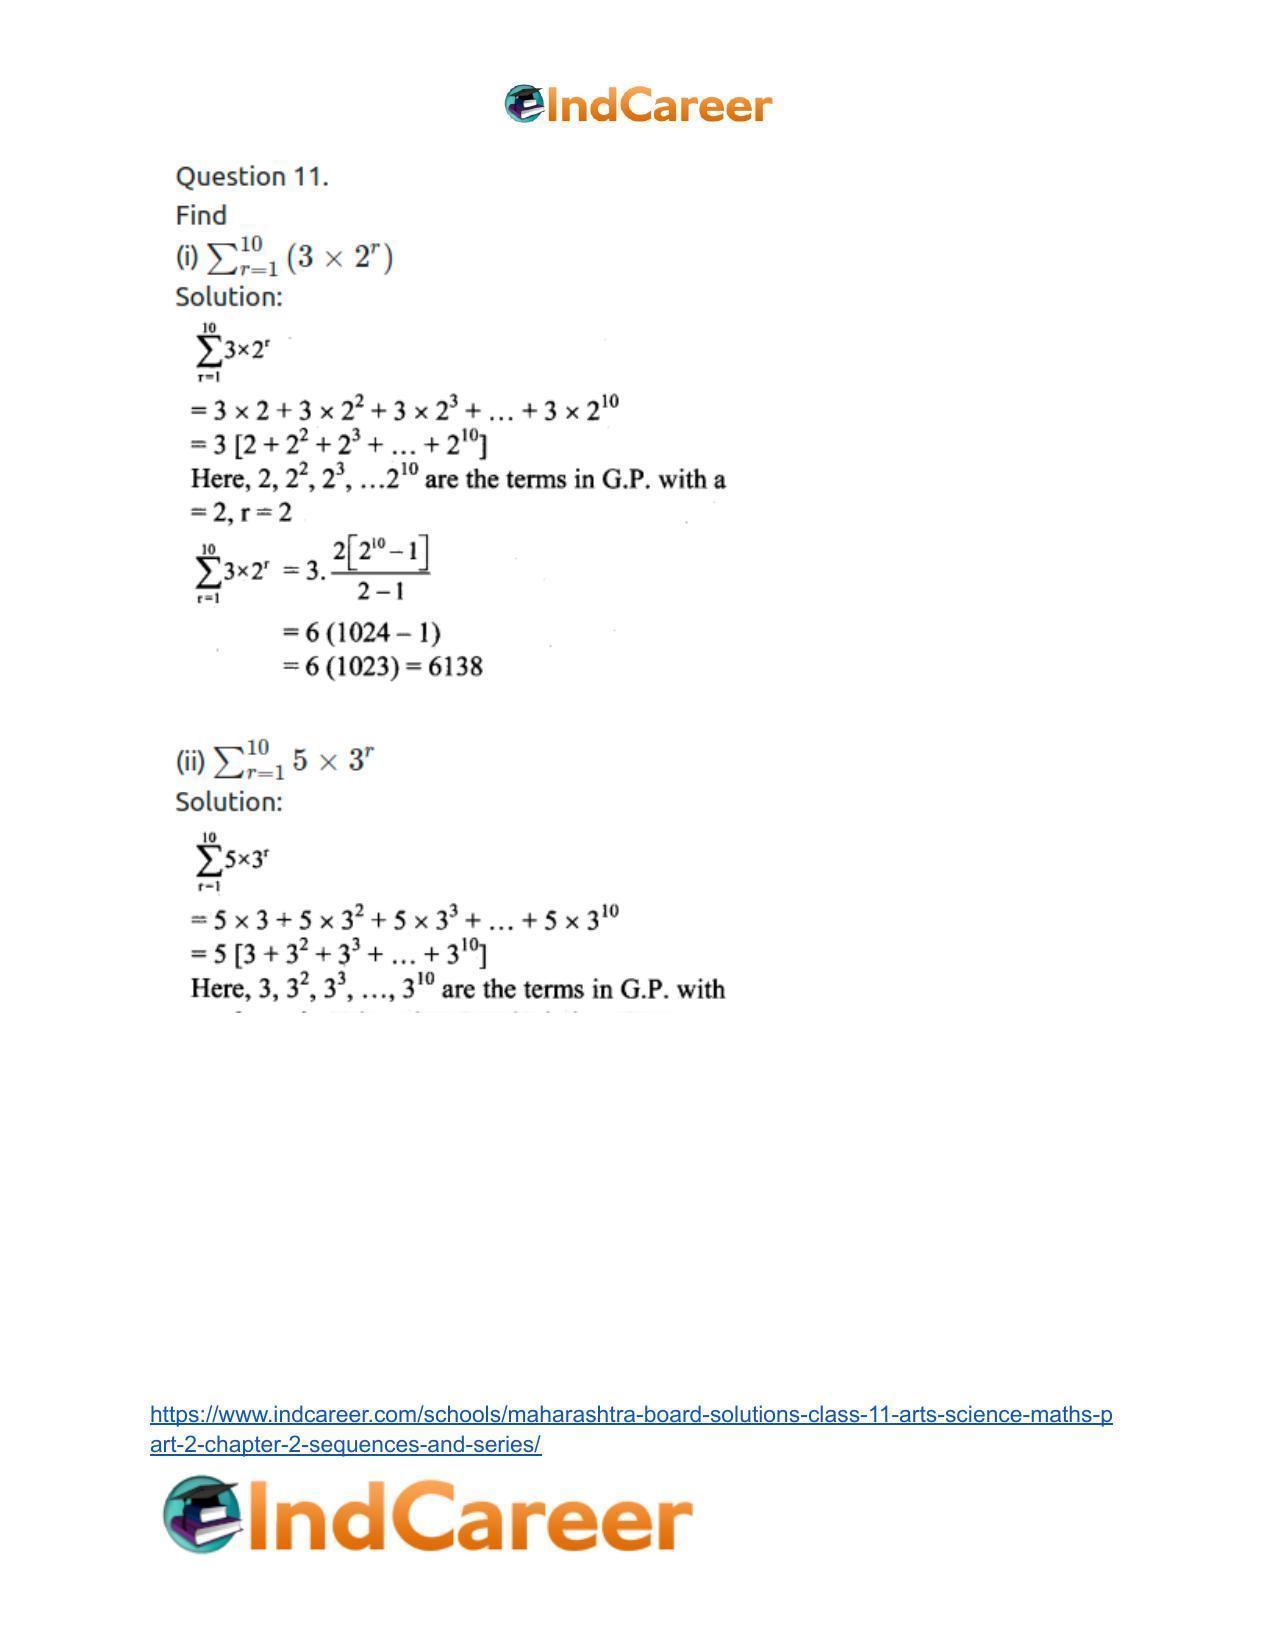 Maharashtra Board Solutions Class 11-Arts & Science Maths (Part 2): Chapter 2- Sequences and Series - Page 37